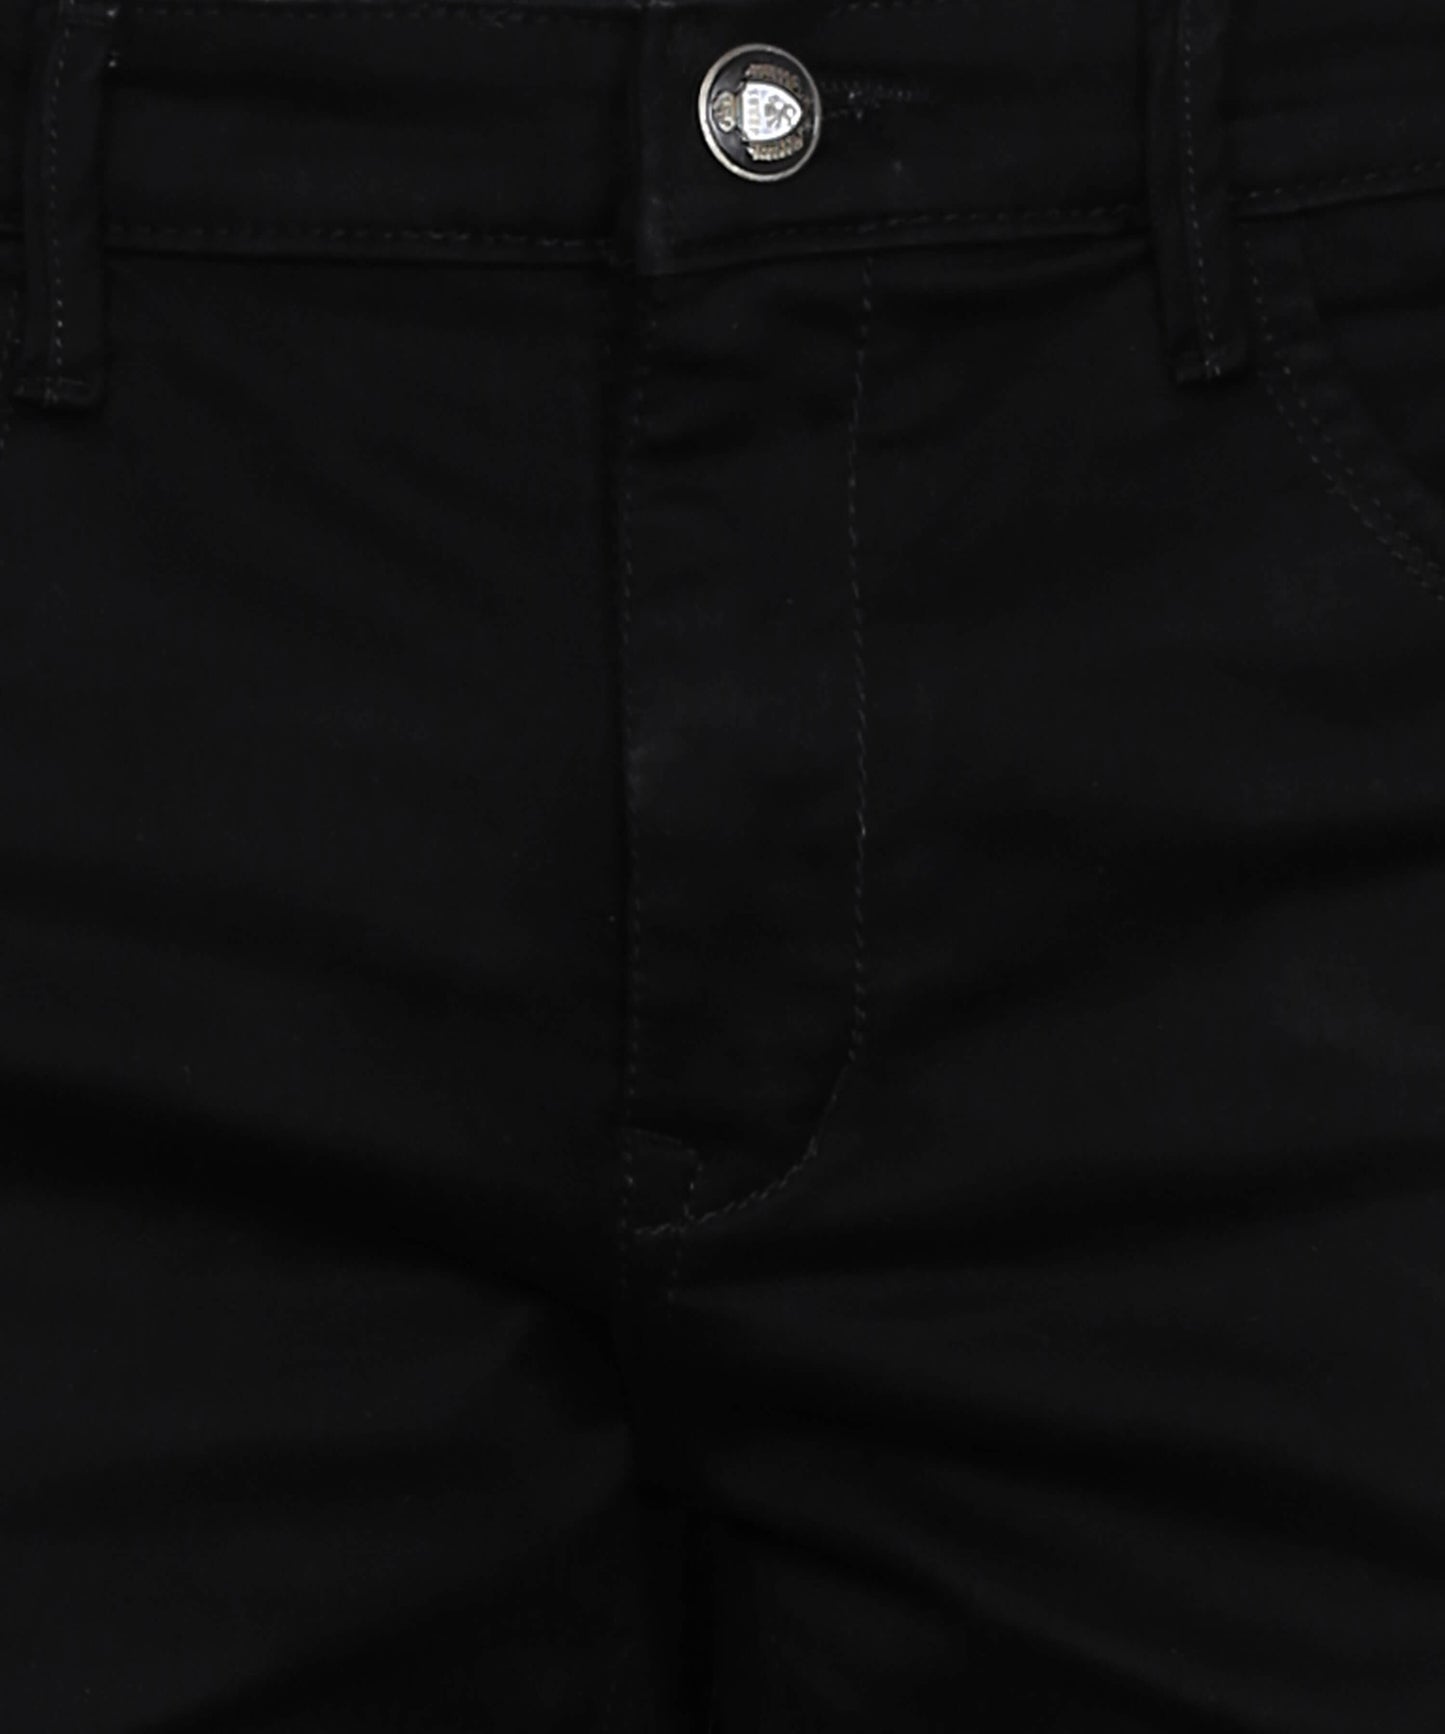 5TH Anfold Mens Black Jeans